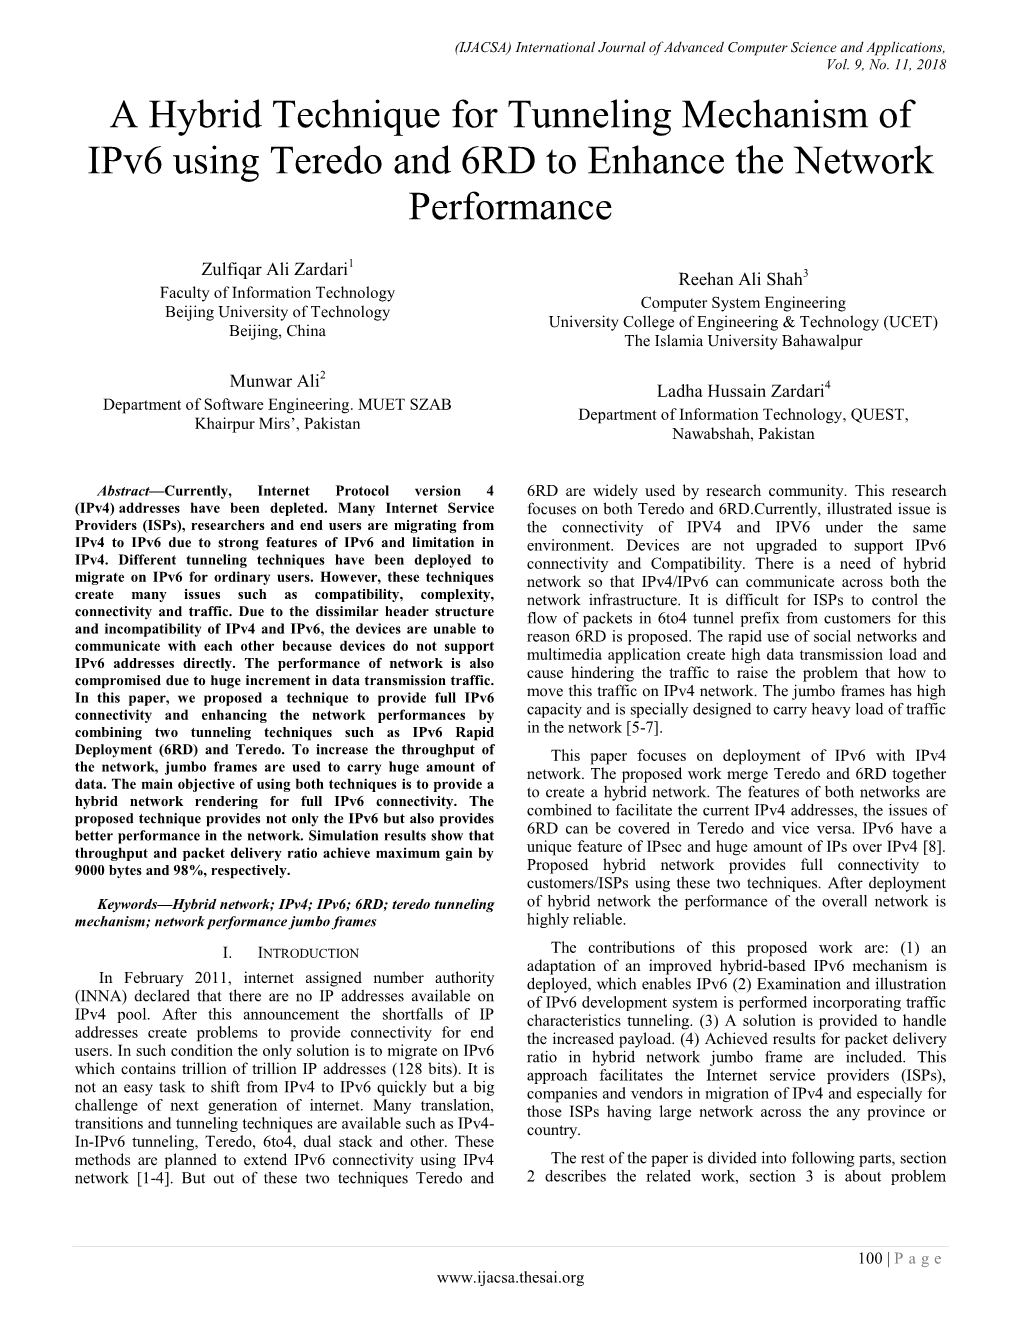 A Hybrid Technique for Tunneling Mechanism of Ipv6 Using Teredo and 6RD to Enhance the Network Performance